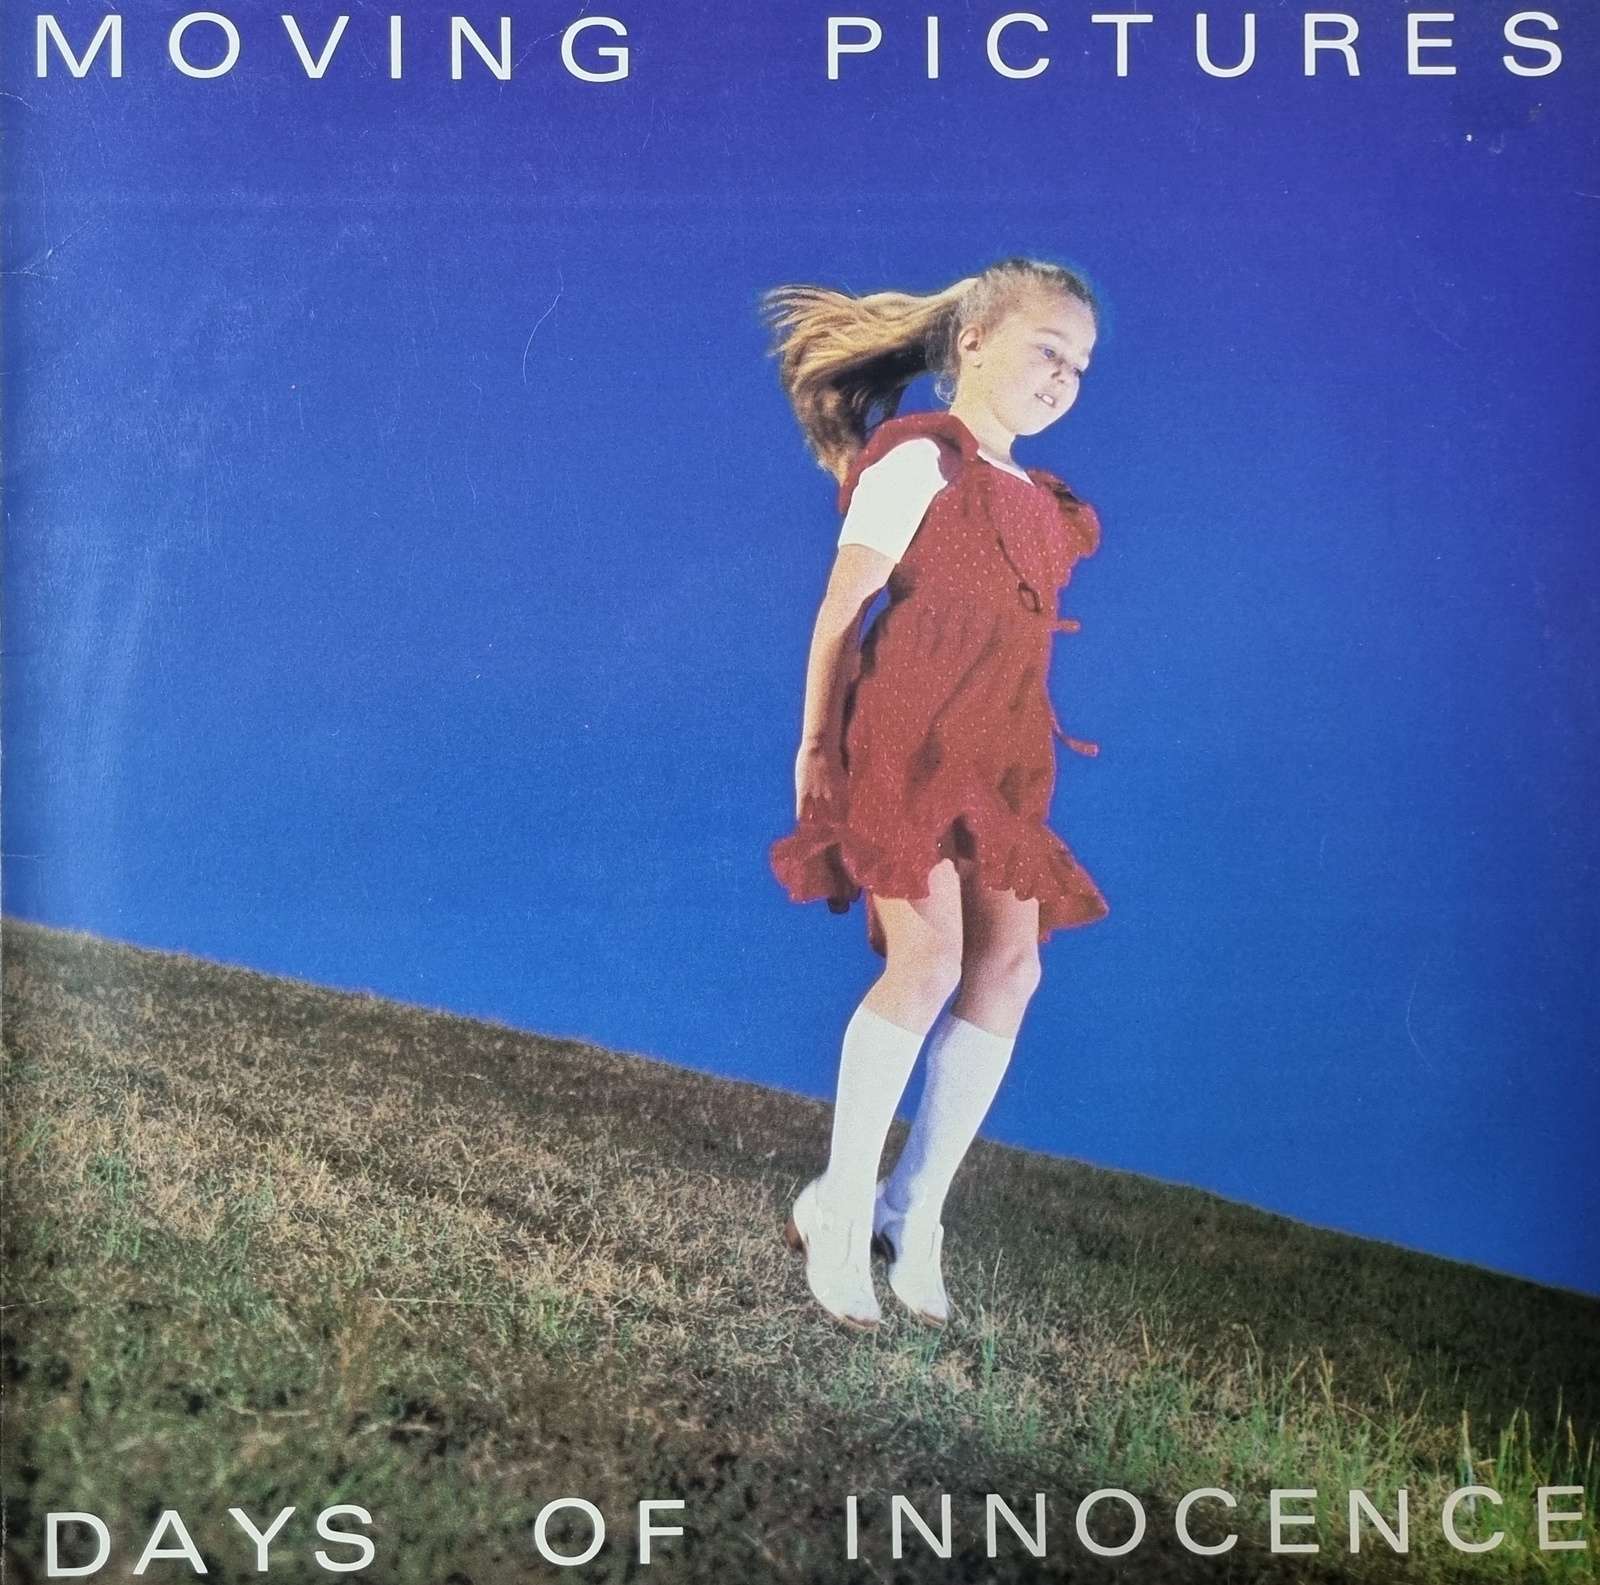 Moving Pictures - Days of Innocence (LP)